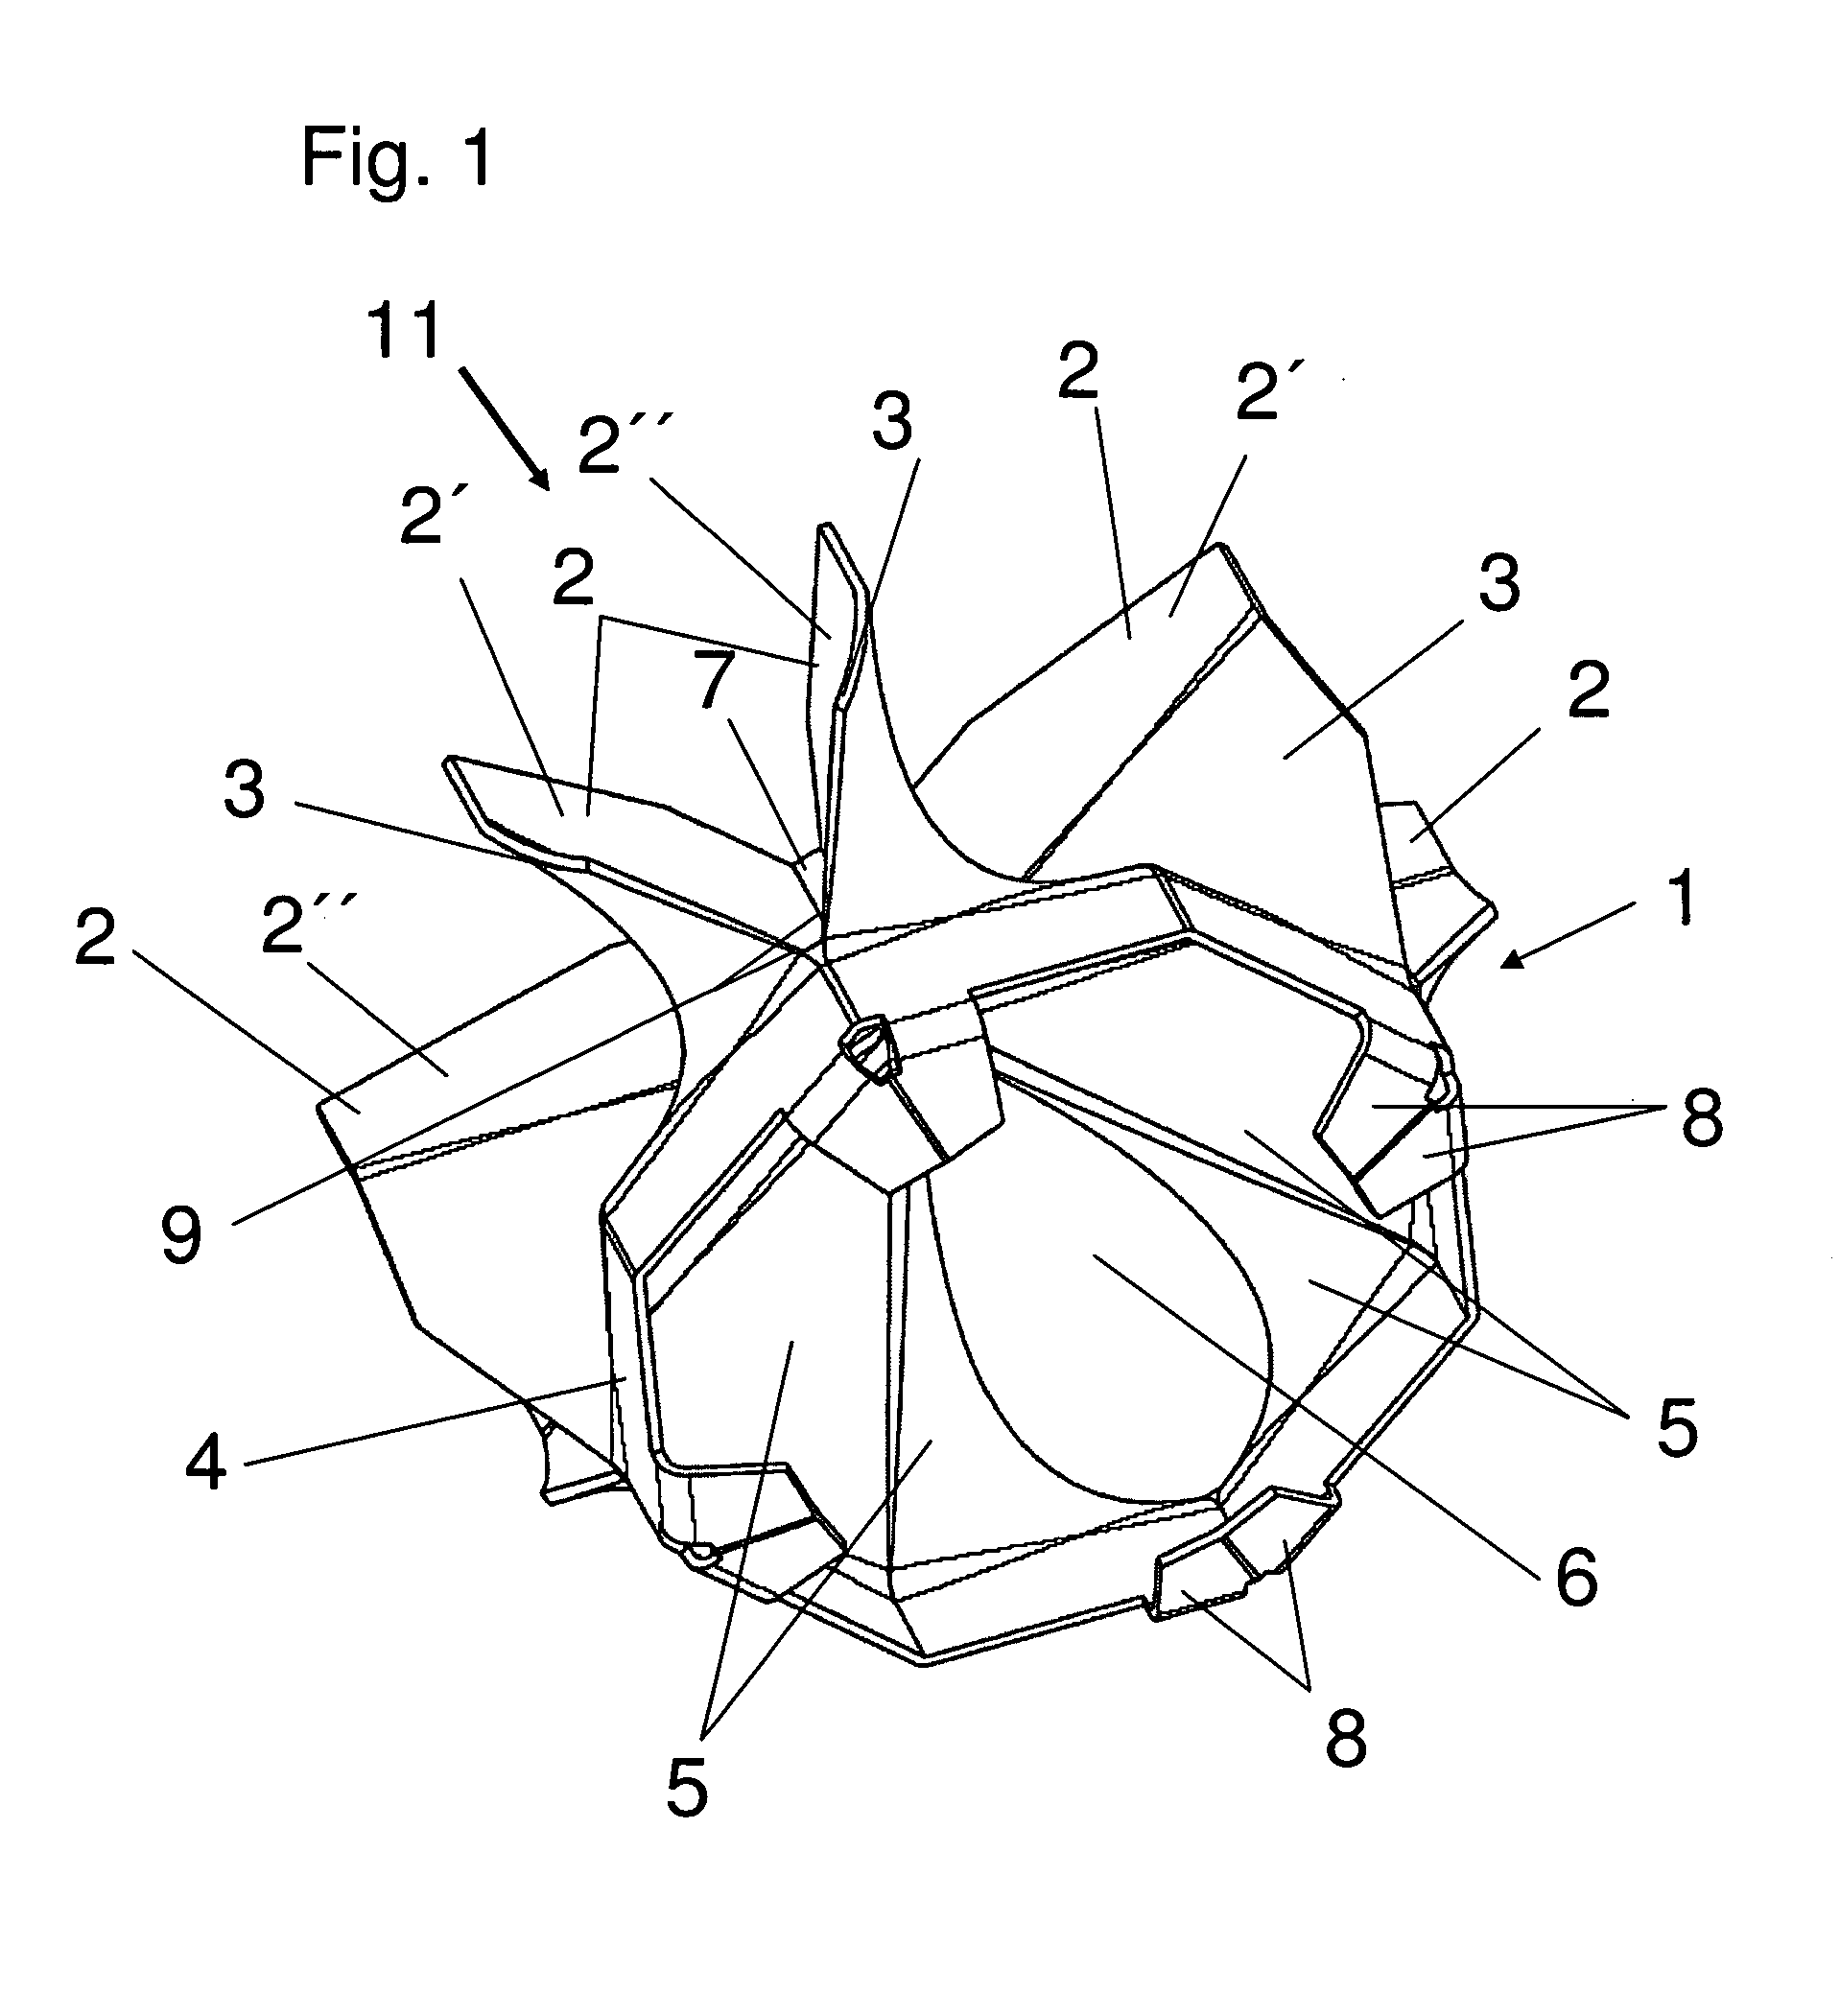 Static mixer for an exhaust gas system of an internal combustion engine